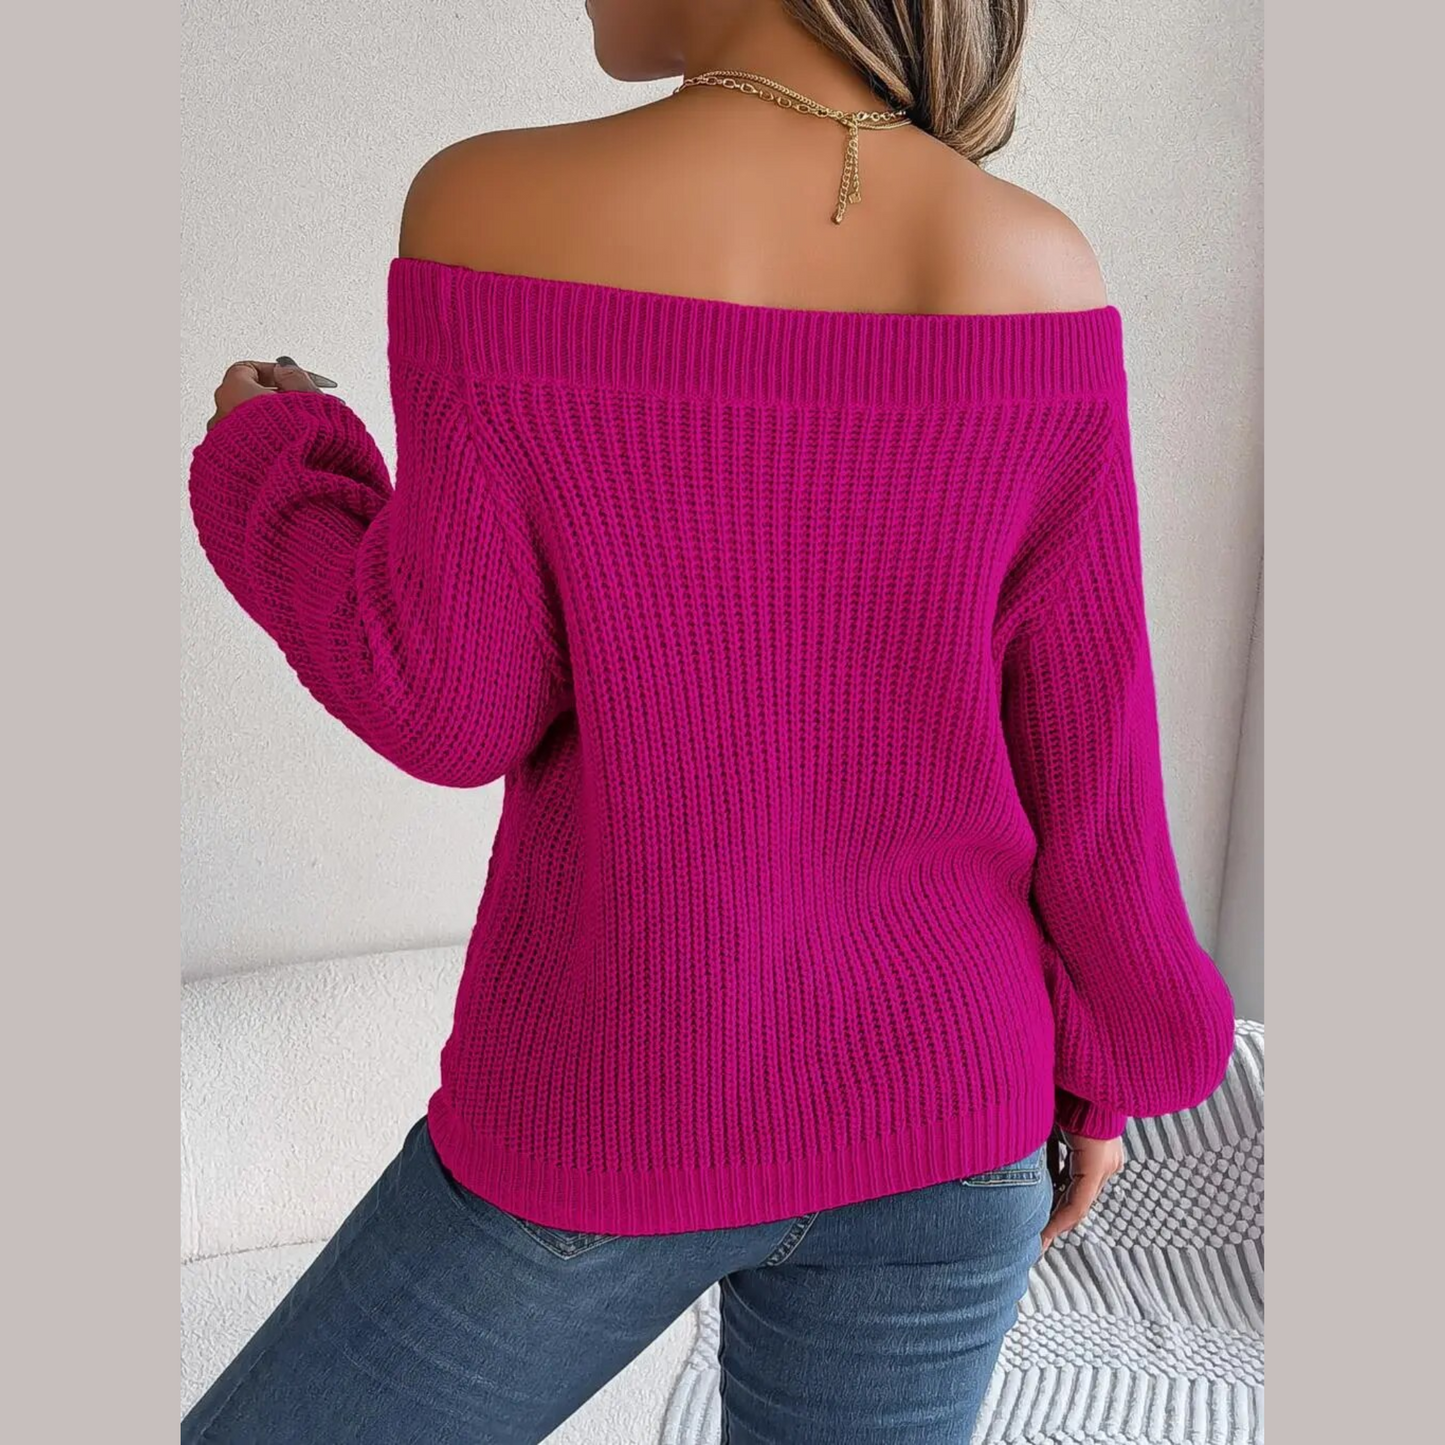 Loni - Rose Red Knitted Off The Shoulder Sweater Top